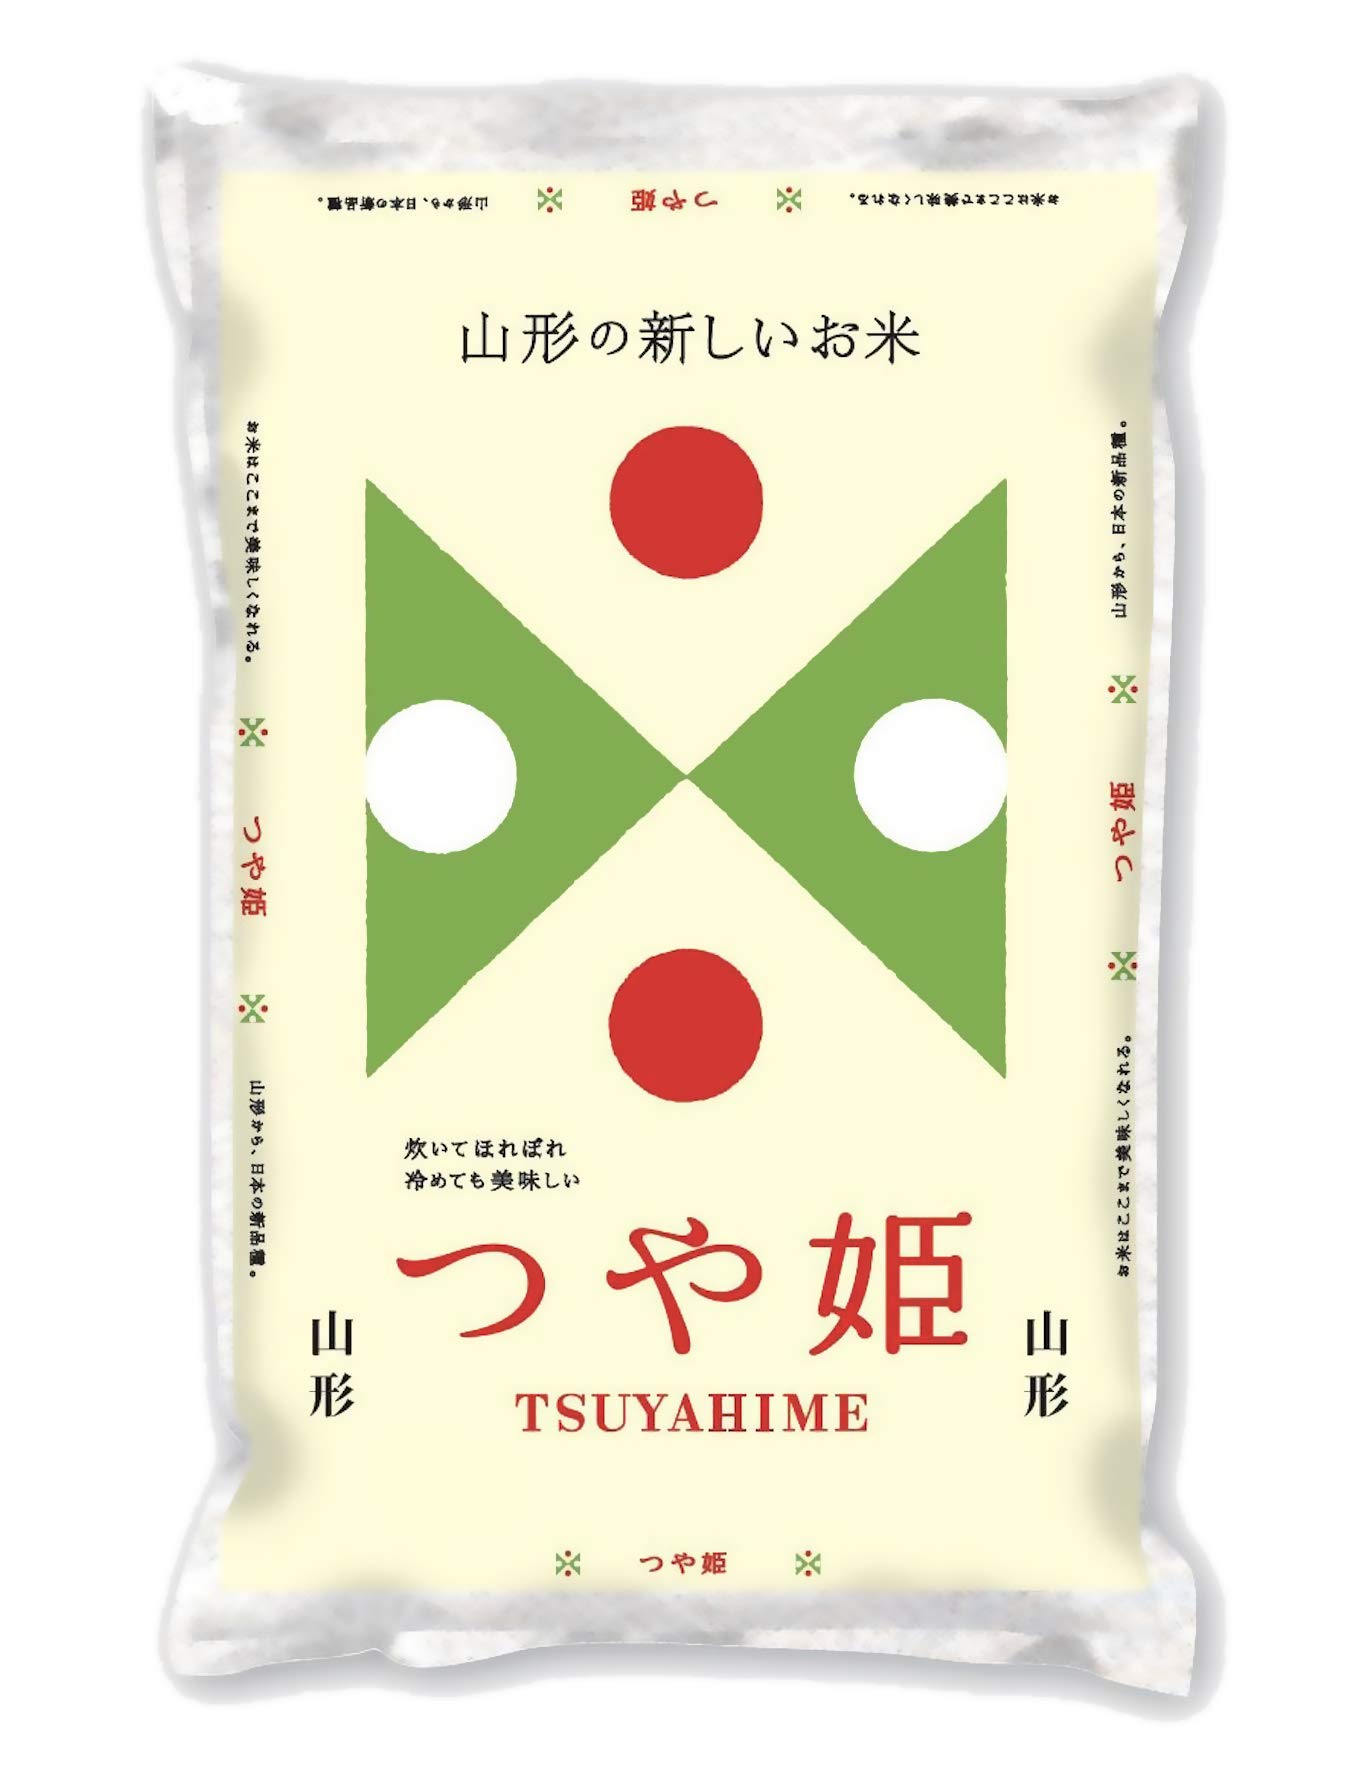 Top in Japan Ranking - Kijima Tsuyahime Yamagata Rice, つや姫 山形県おきたま産, Milled Short Grain Rice, Supremely Pure And Delicious Special Rice, Extremely ...